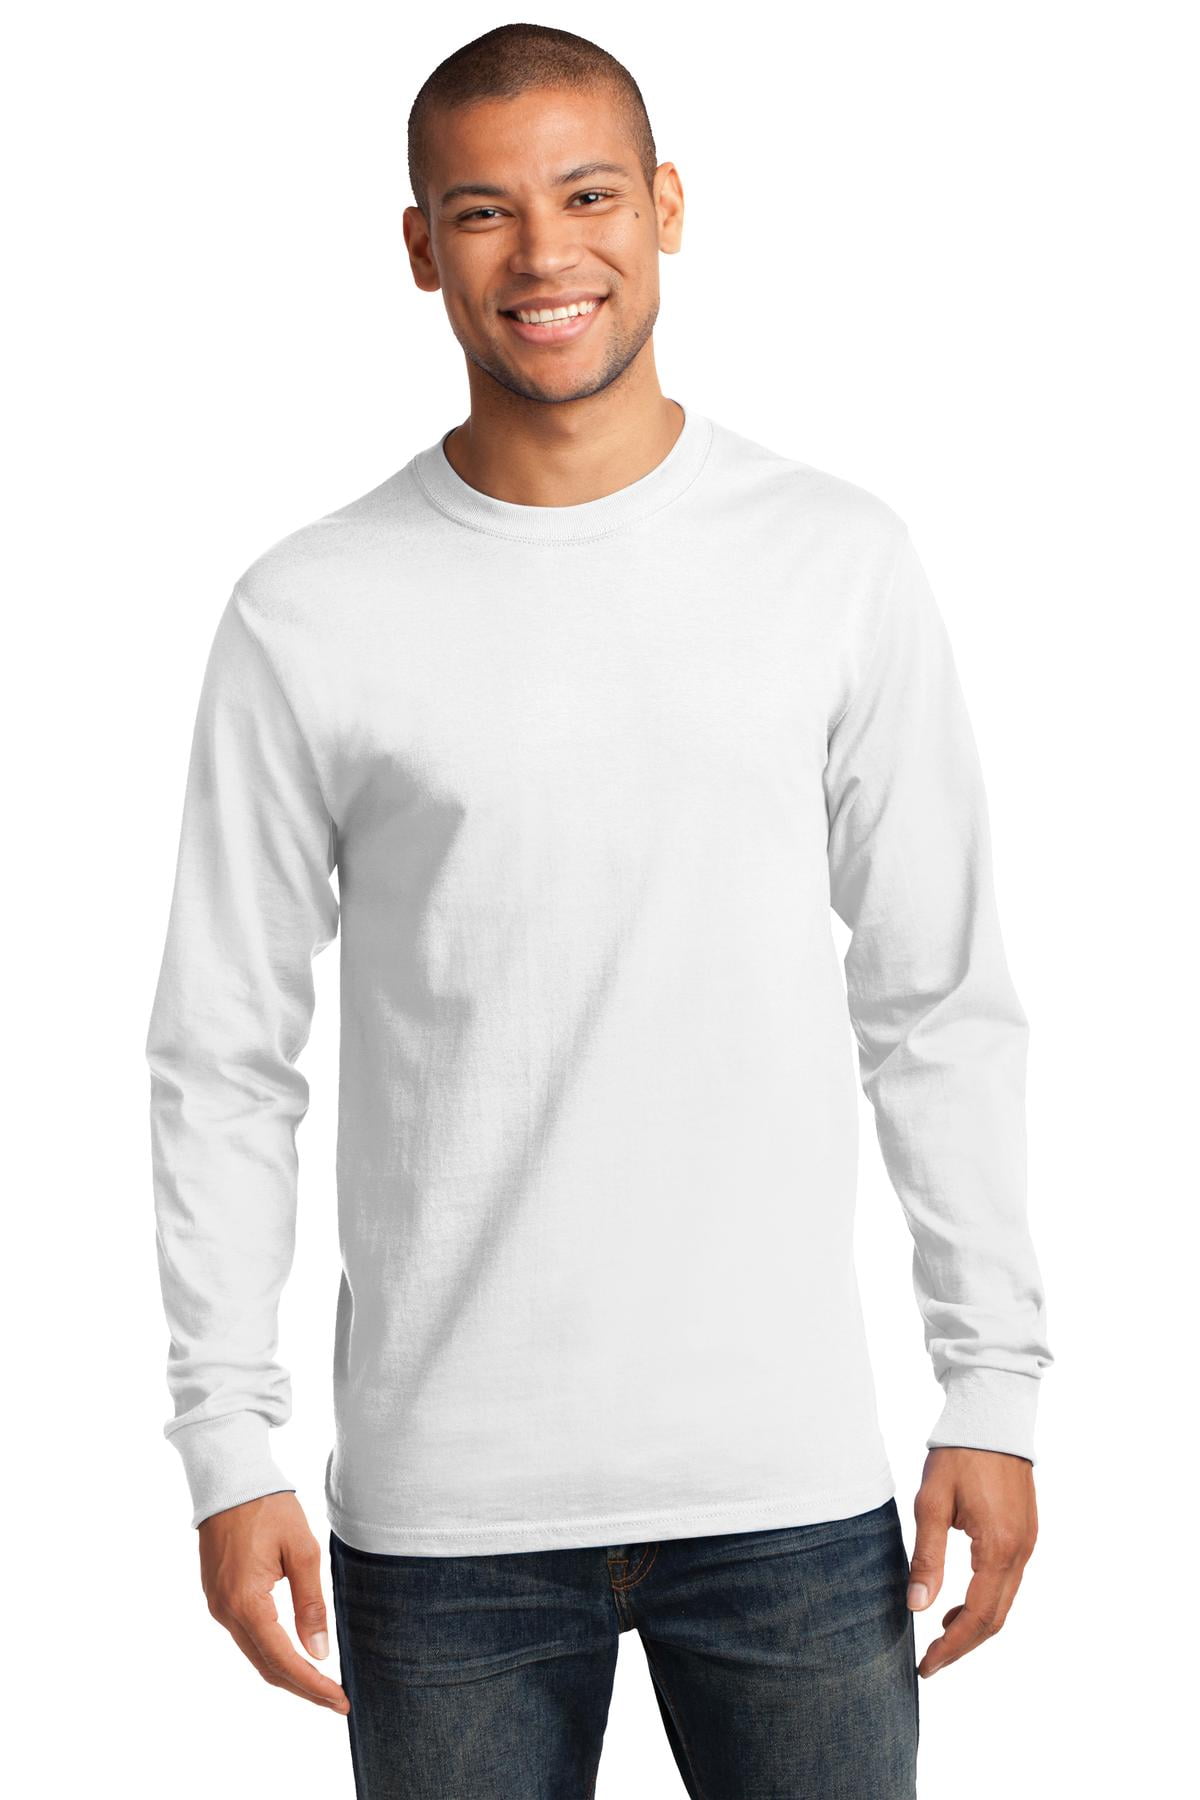 Port & Company Long Sleeve Essential T-Shirt. Natural. S